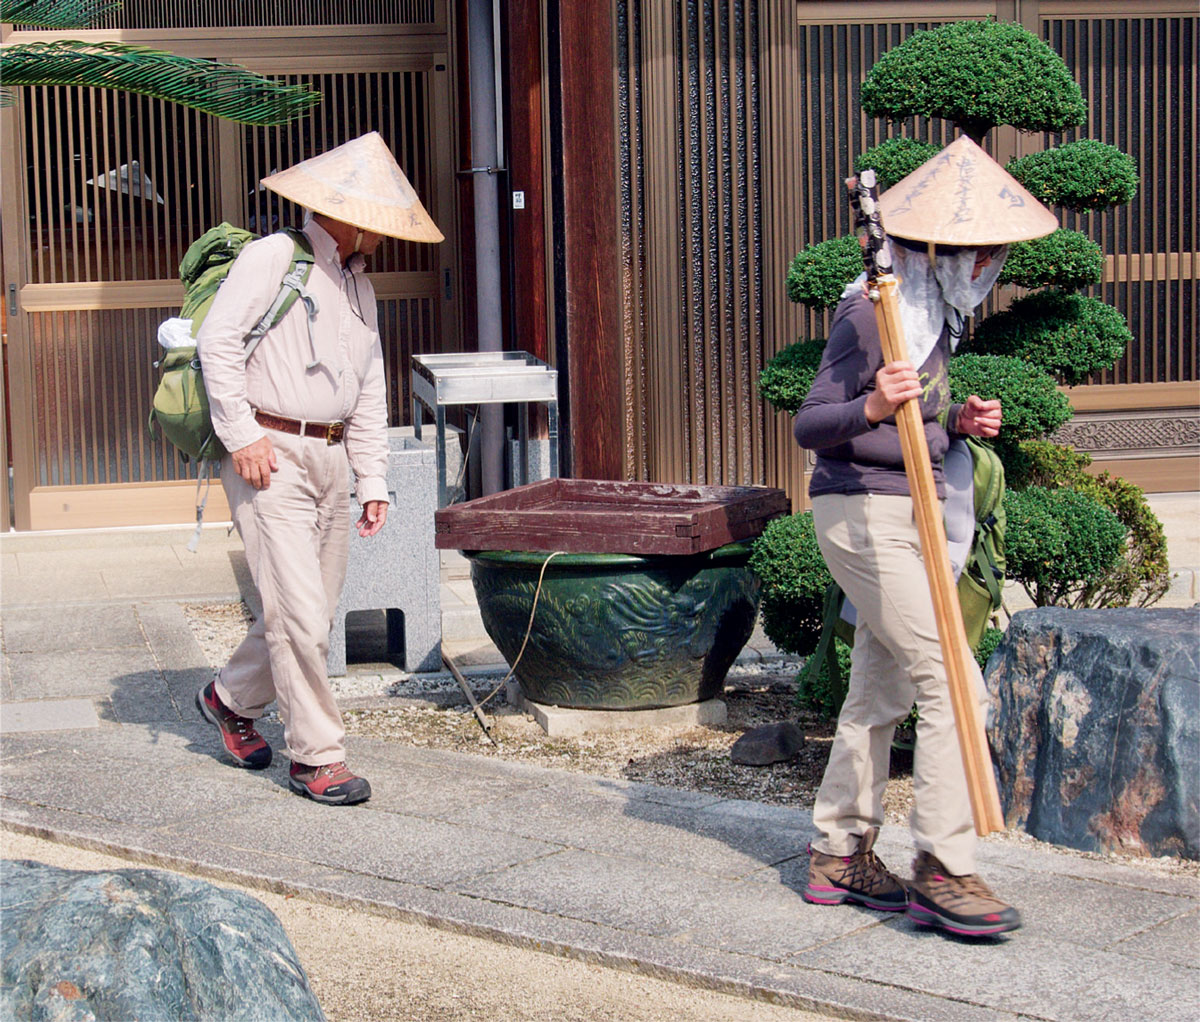 Walking-Search-Culture-Old-Japan-Japanese-pilgrims-traveled-route-centuries